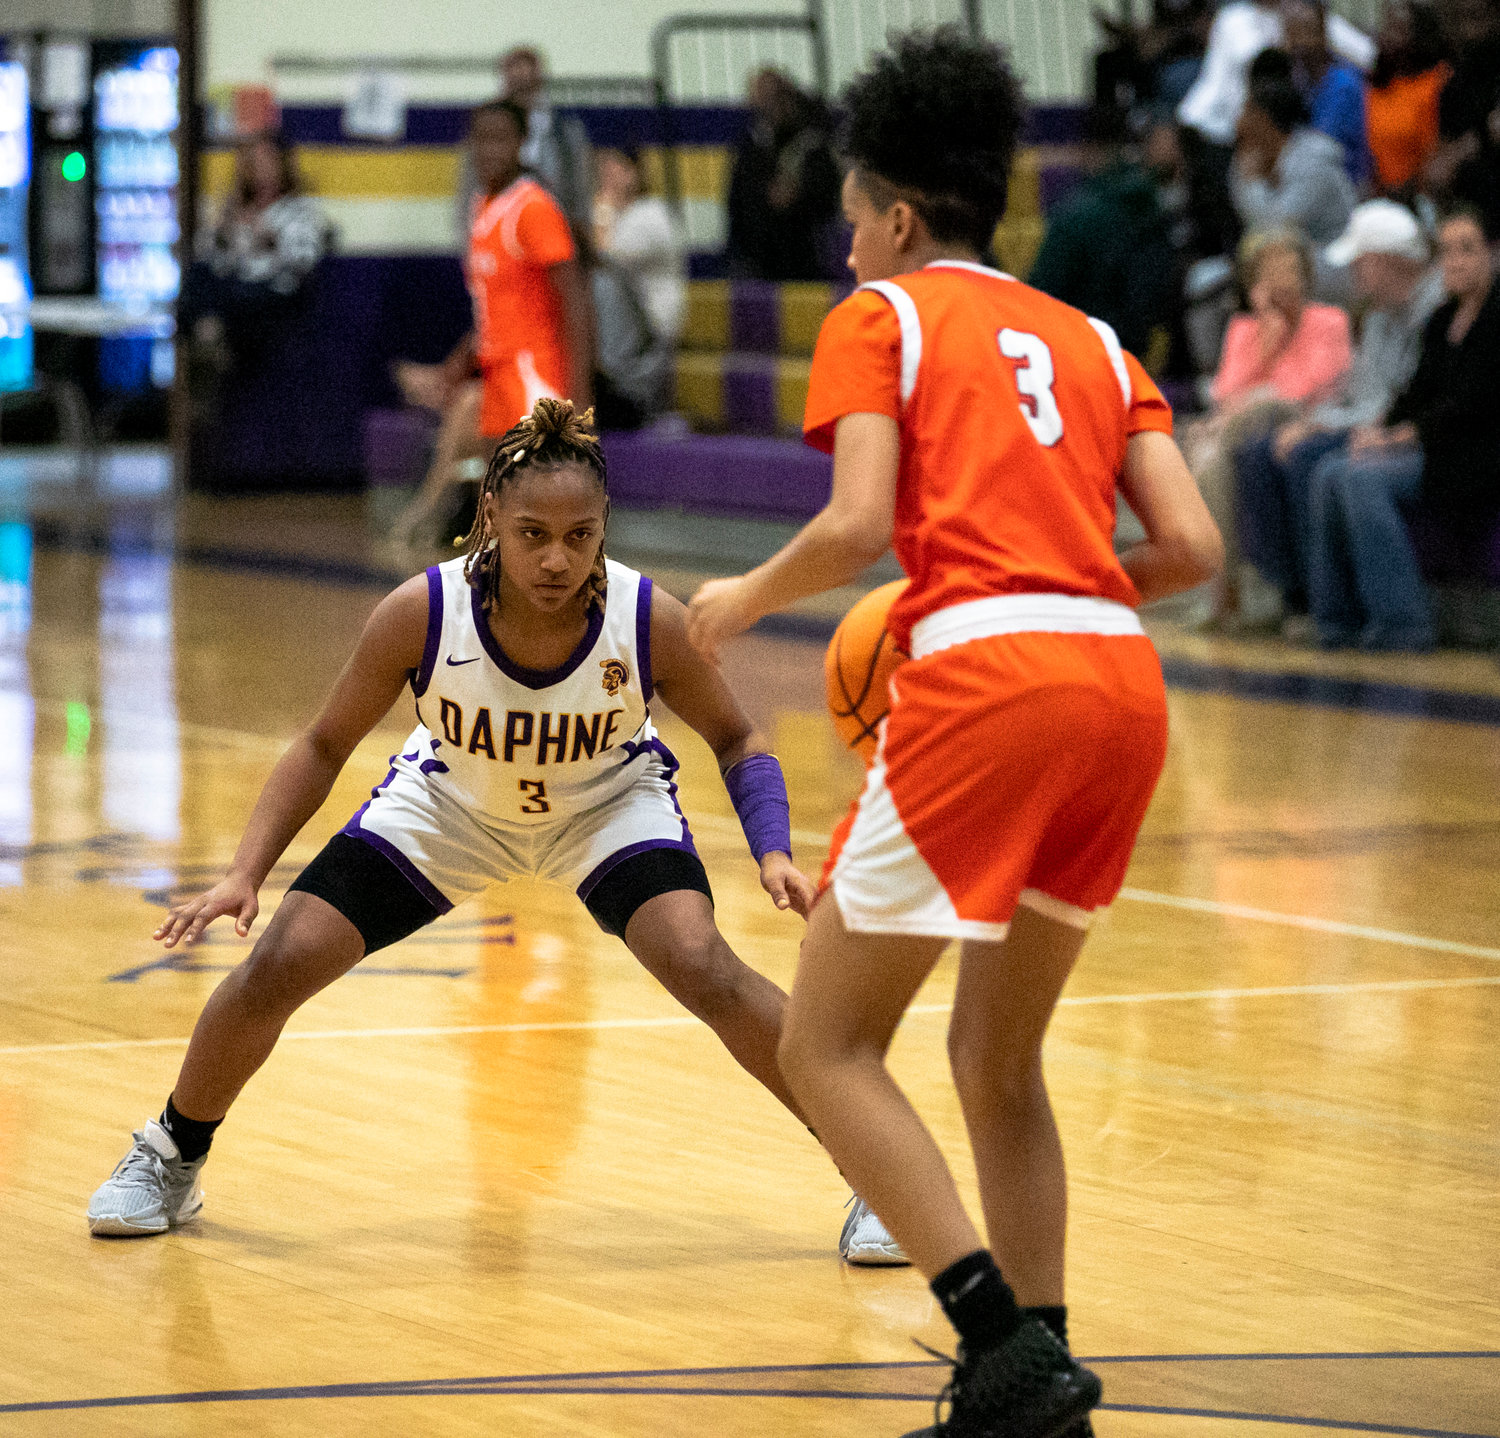 Daphne freshman Abagail Johnson eyes the ball in the backcourt of the Lady Trojans’ non-area contest against the Baldwin County Tigers at Daphne High School Dec. 13, 2022. The Lady Trojans checked in at No. 9 in the newest edition of the coaches’ poll from the AABC where the Foley Lady Lions joined them at No. 6.